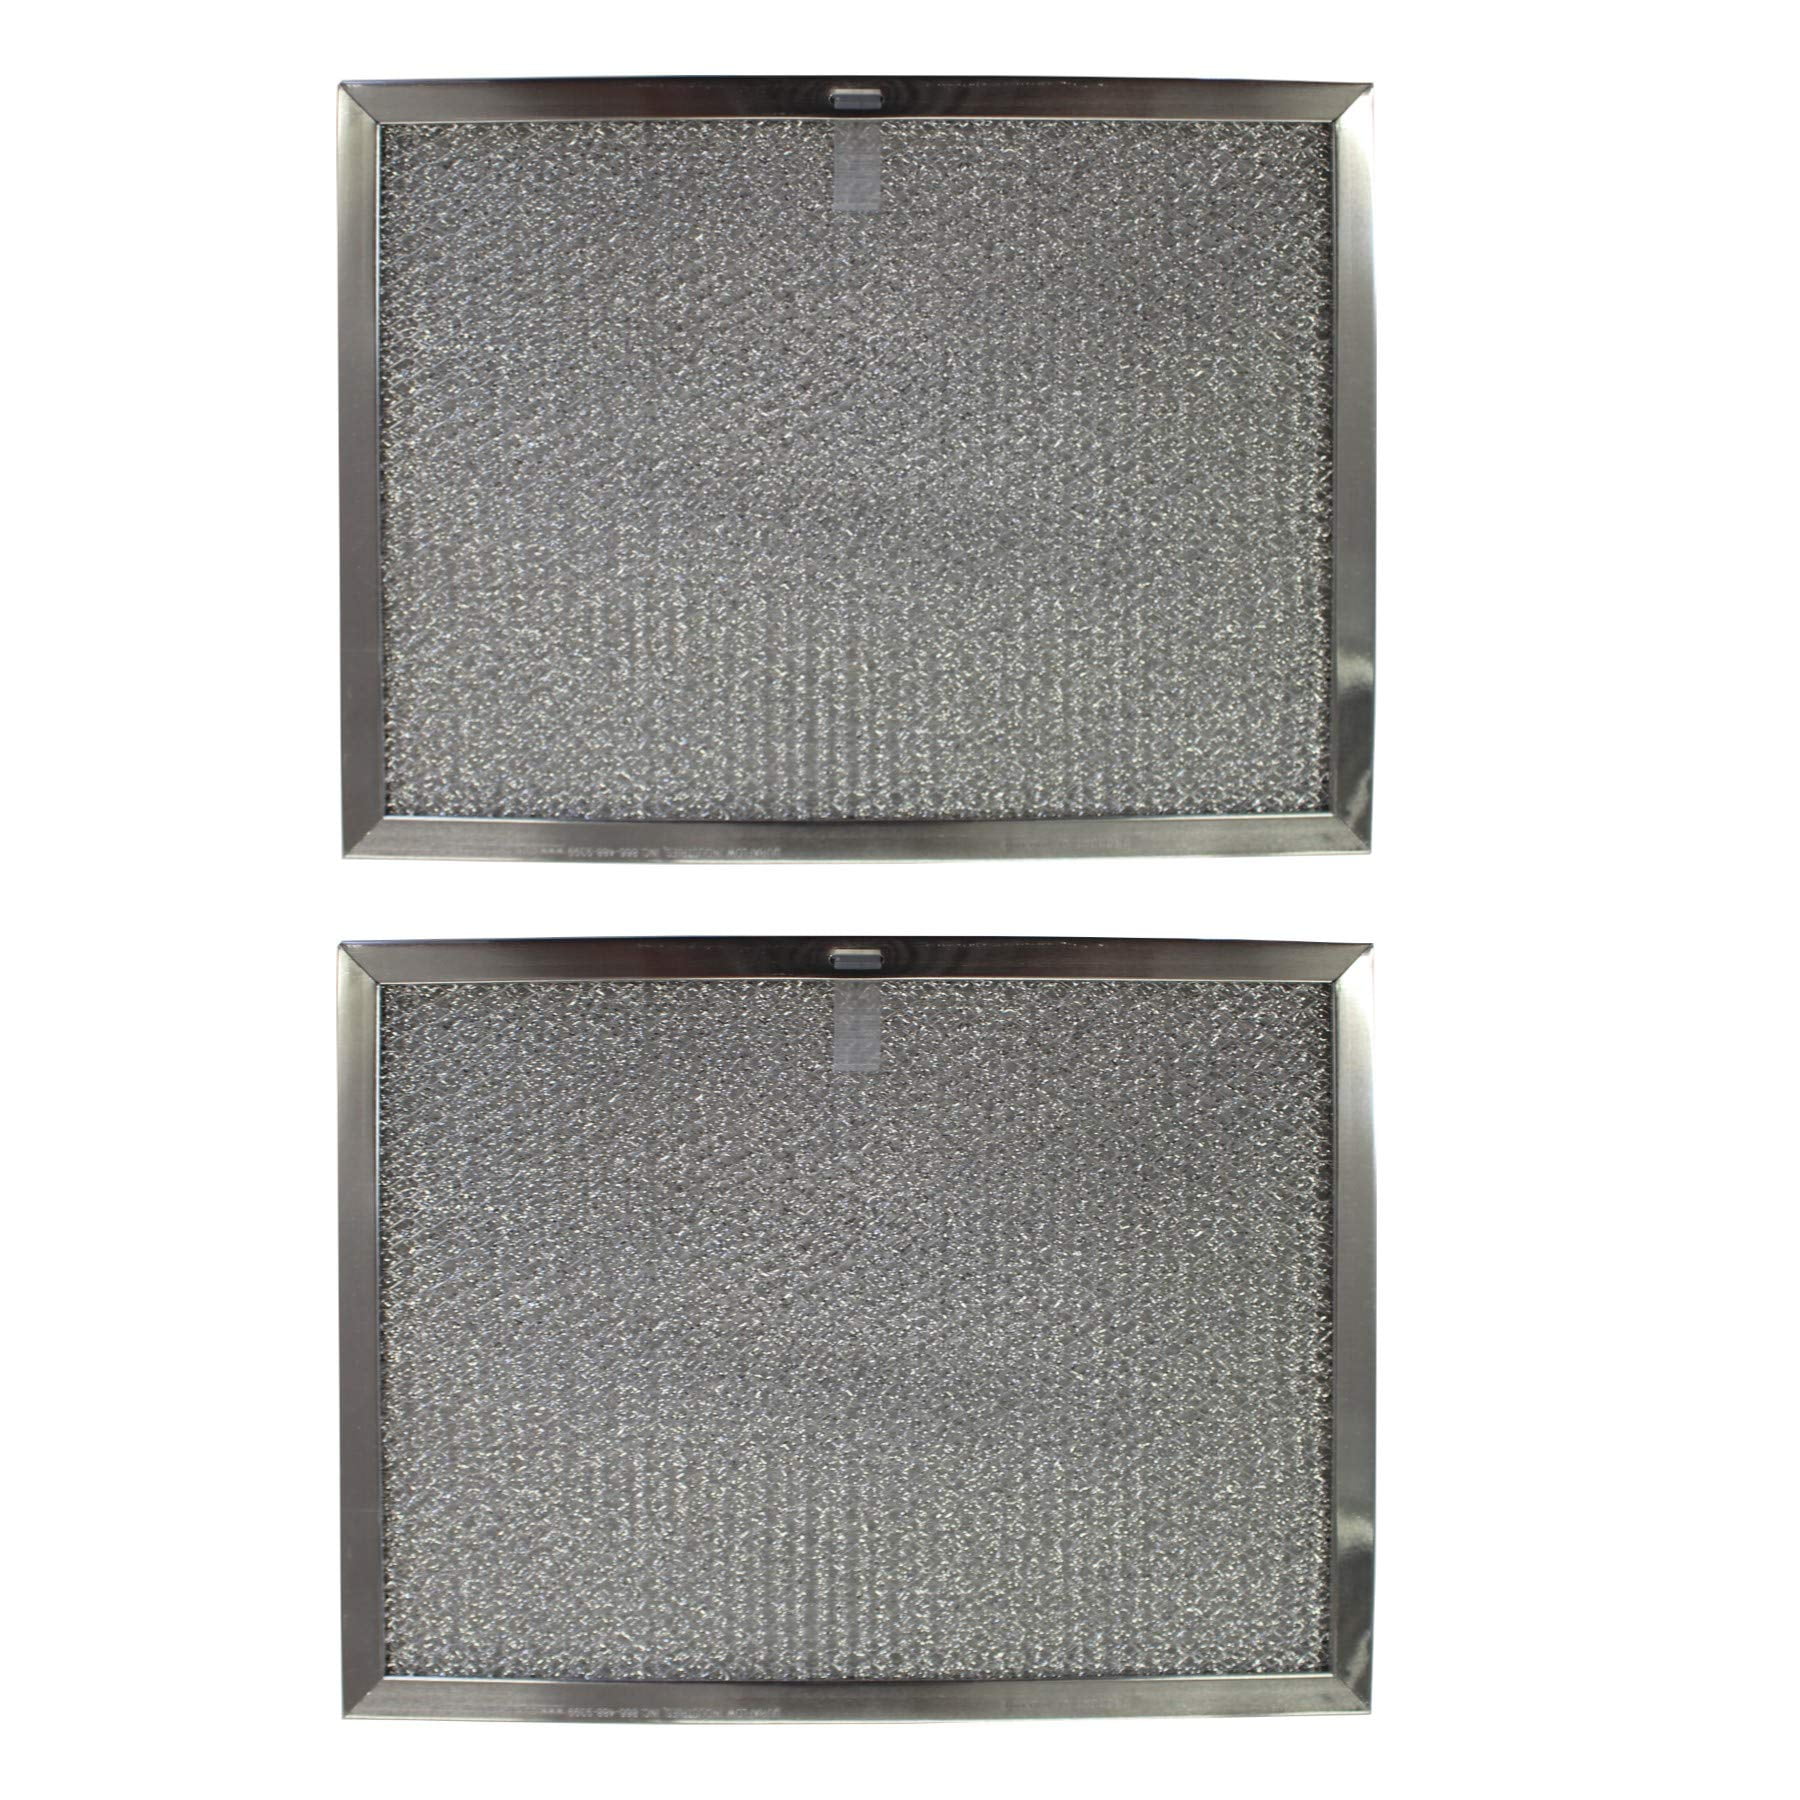 2  Filters DE63-00367D Charcoal Filter for Samsung Microwave 4 x 8 9/16 x 3/8" 